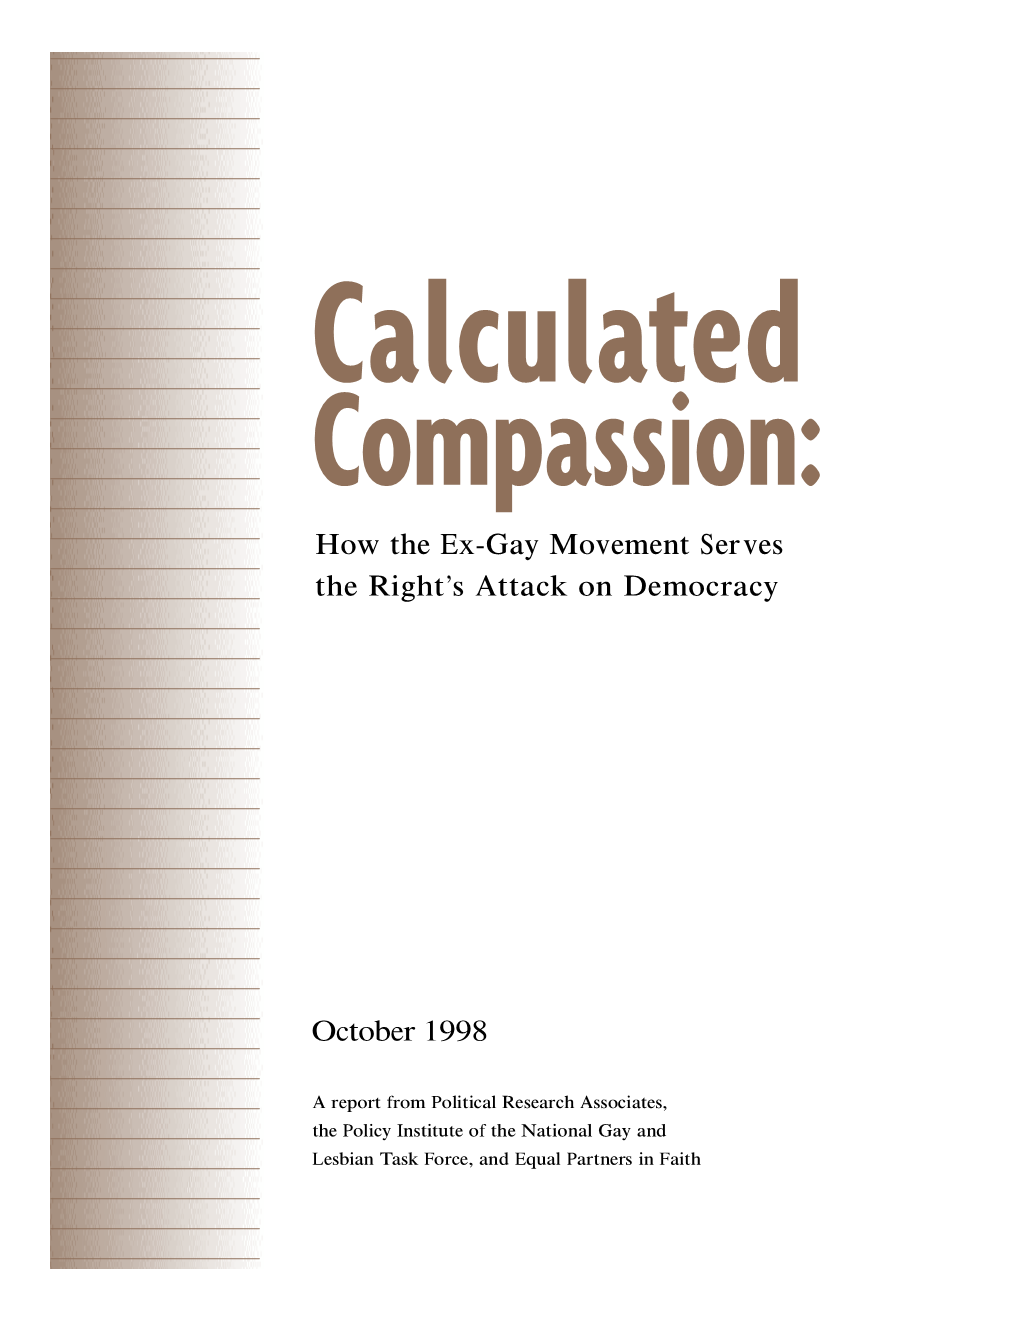 Calculated Compassion Is a Comprehensive Examination of the Political Character and Role of the Ex-Gay Movement